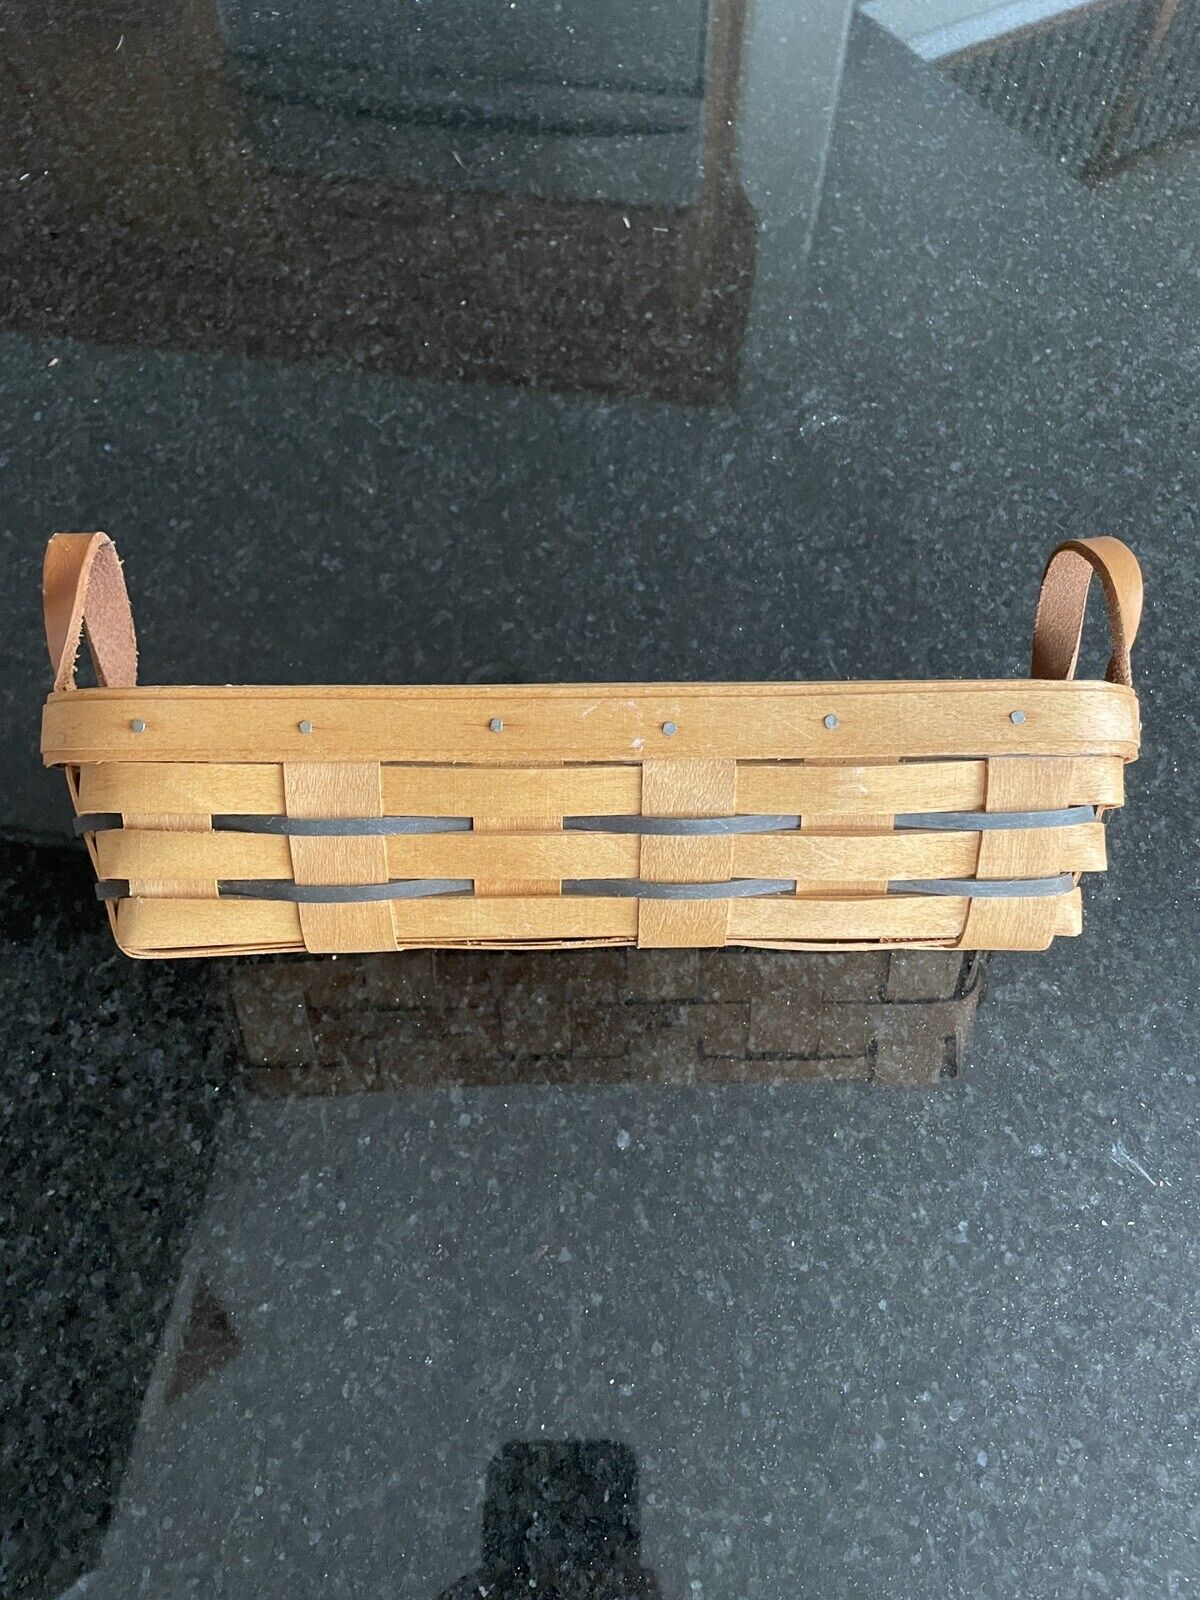 1994 Longaberger Cracker Basket W/ Blue with Plastic Liner 11.5 in x 5 in x 3 in